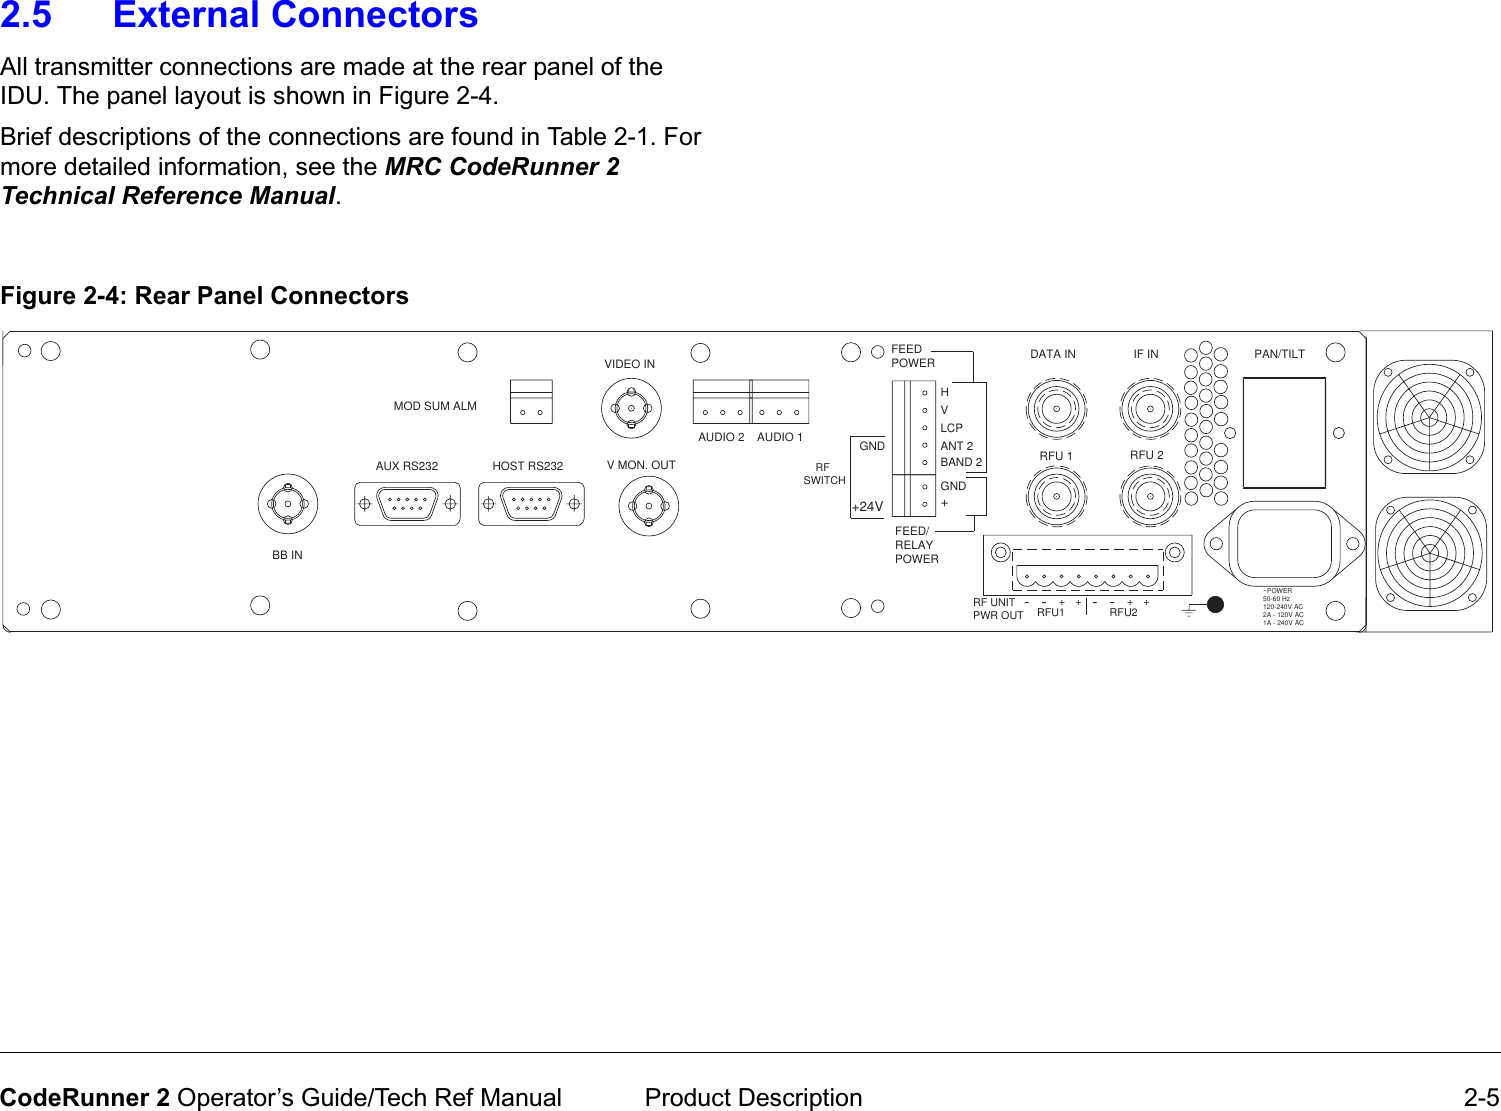  Product Description 2-5CodeRunner 2 Operator’s Guide/Tech Ref Manual2.5 External ConnectorsAll transmitter connections are made at the rear panel of the IDU. The panel layout is shown in Figure 2-4. Brief descriptions of the connections are found in Table 2-1. For more detailed information, see the MRCCodeRunner2TechnicalReferenceManual. Figure 2-4: Rear Panel ConnectorsBB INVIDEO INAUX RS232 BAND 2ANT 2+RFU 2RFU 1~POWER50-60 Hz120-240V AC2A - 120V AC1A - 240V ACFEED/RELAYPOWERHOST RS232 V MON. OUTAUDIO 1AUDIO 2IF INDATA IN PAN/TILTFEEDMOD SUM ALMPOWERVHLCPGND+24VGNDRF UNIT PWR OUT--++--++RFU1 RFU2    RFSWITCH